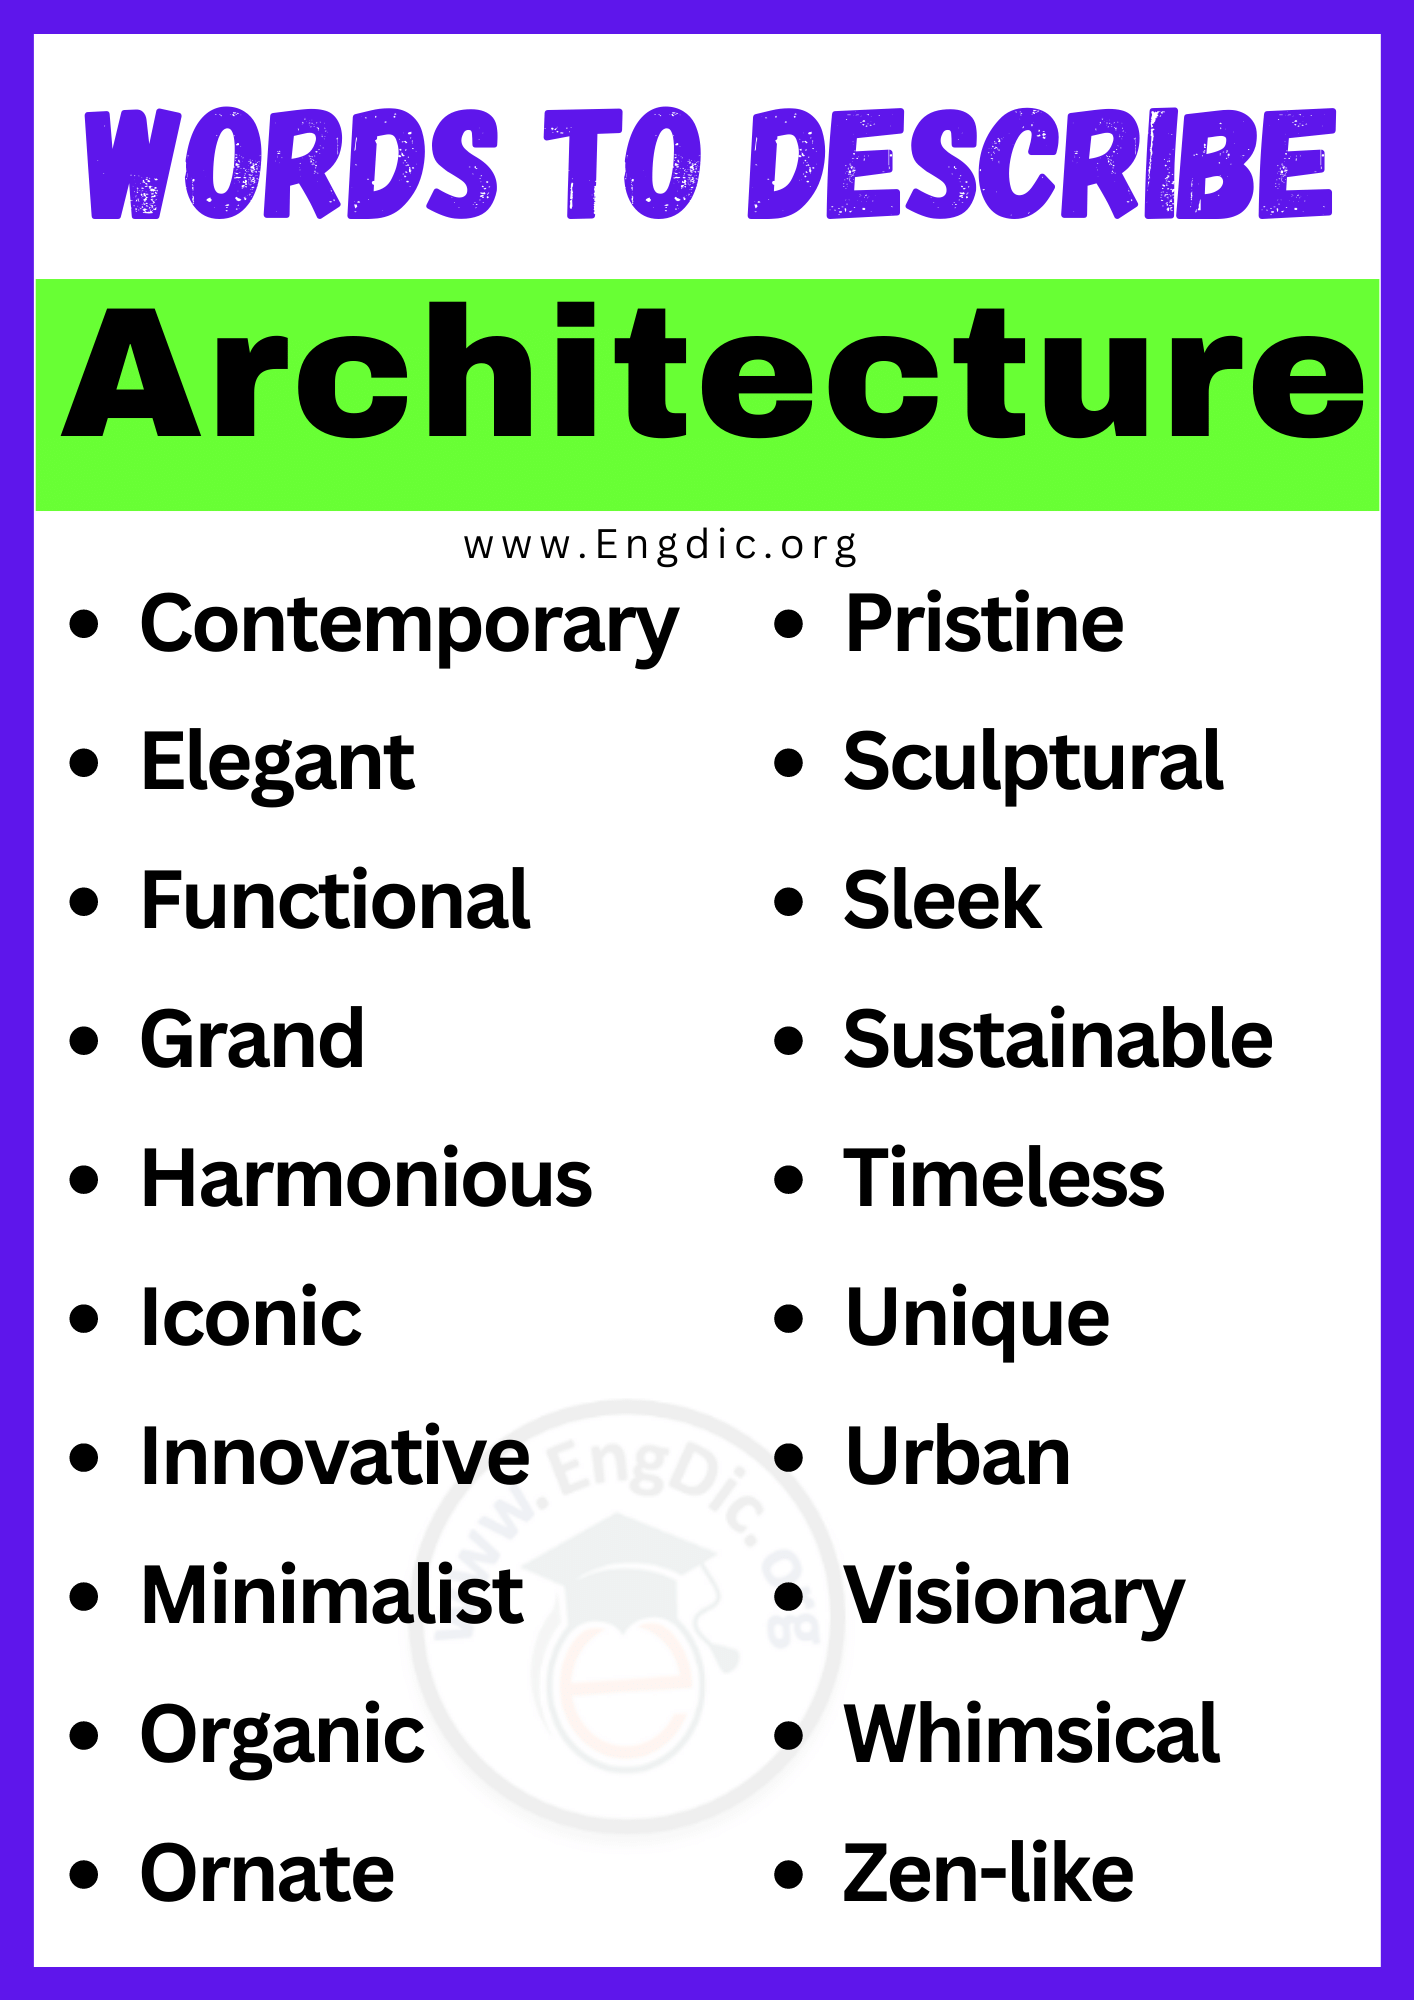 Words to Describe Architecture